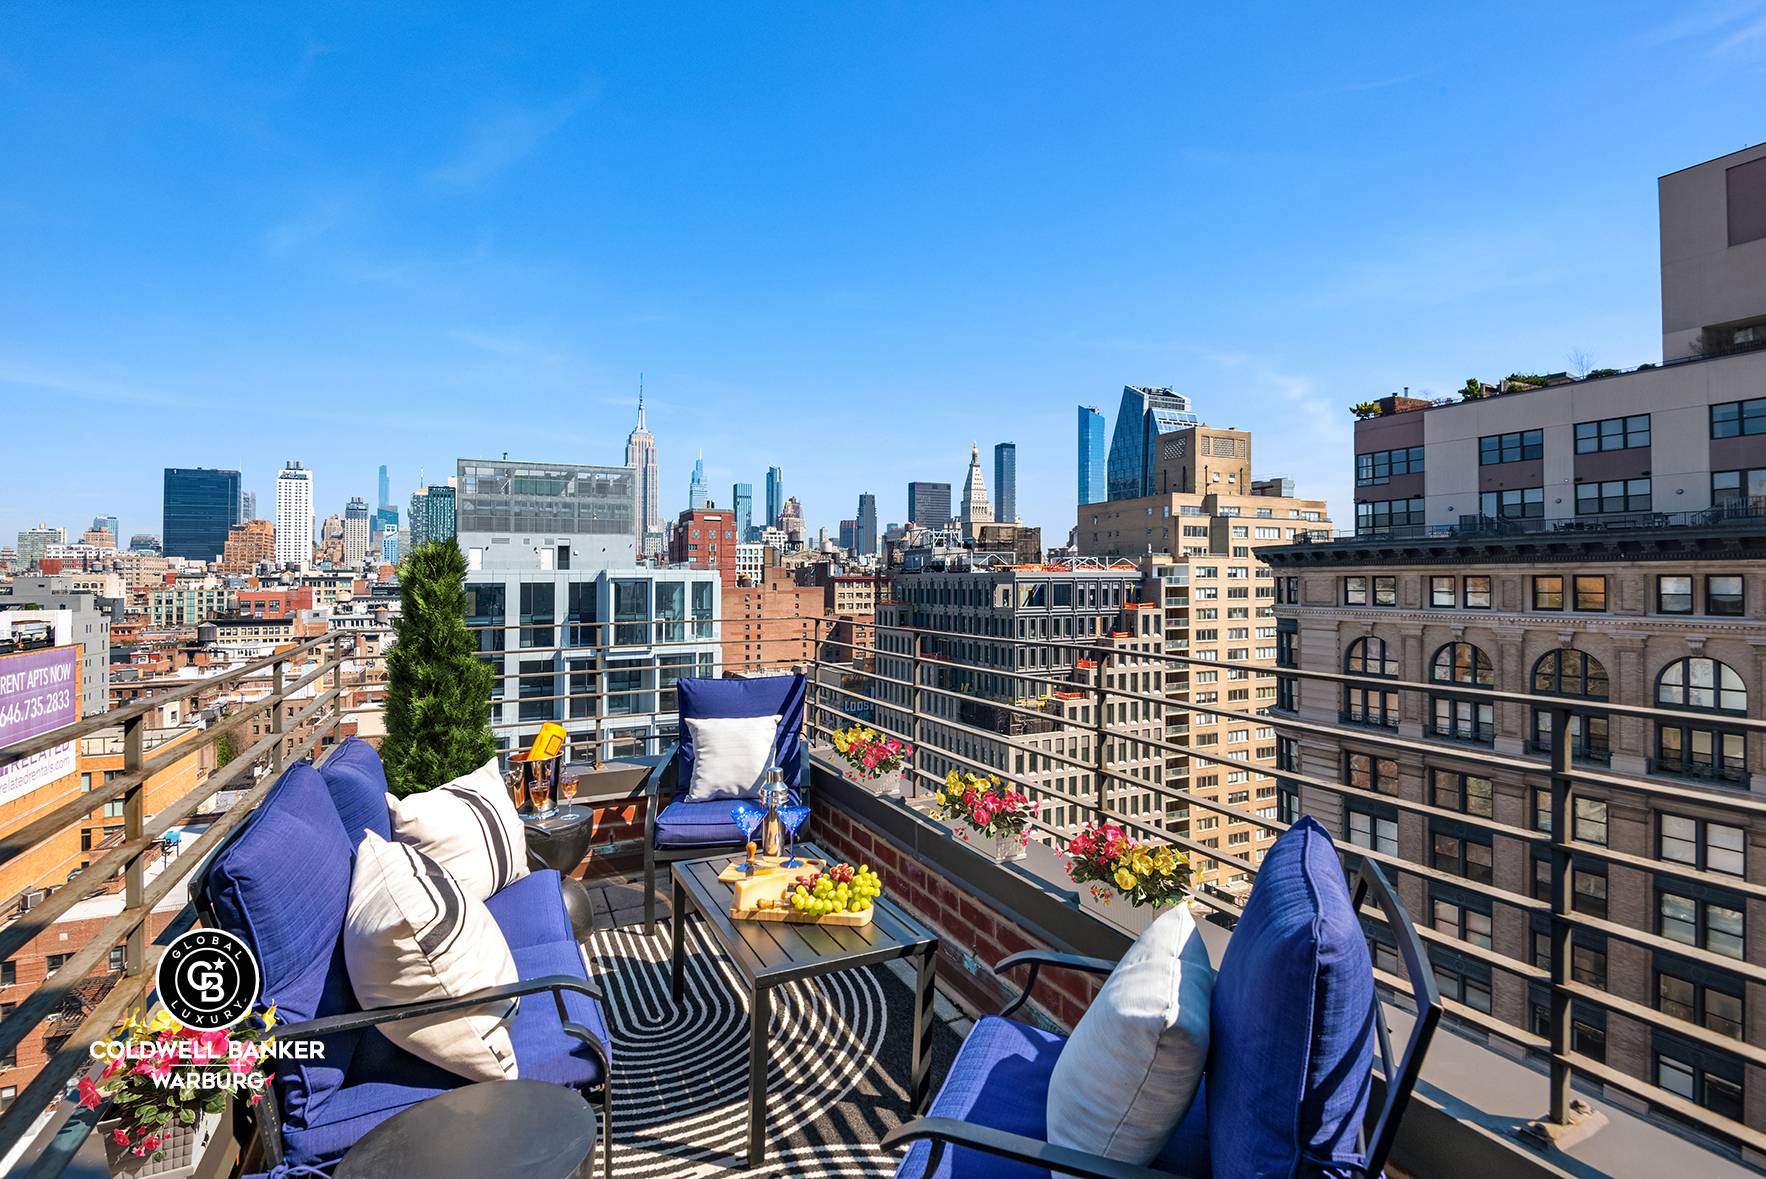 Private Terrace Spectacular Views Full Service Building Amazing Common Landscaped Roof Amenities include a 24 hour doorman, live in super, porters, laundry room, bike room, and a large roof deck ...